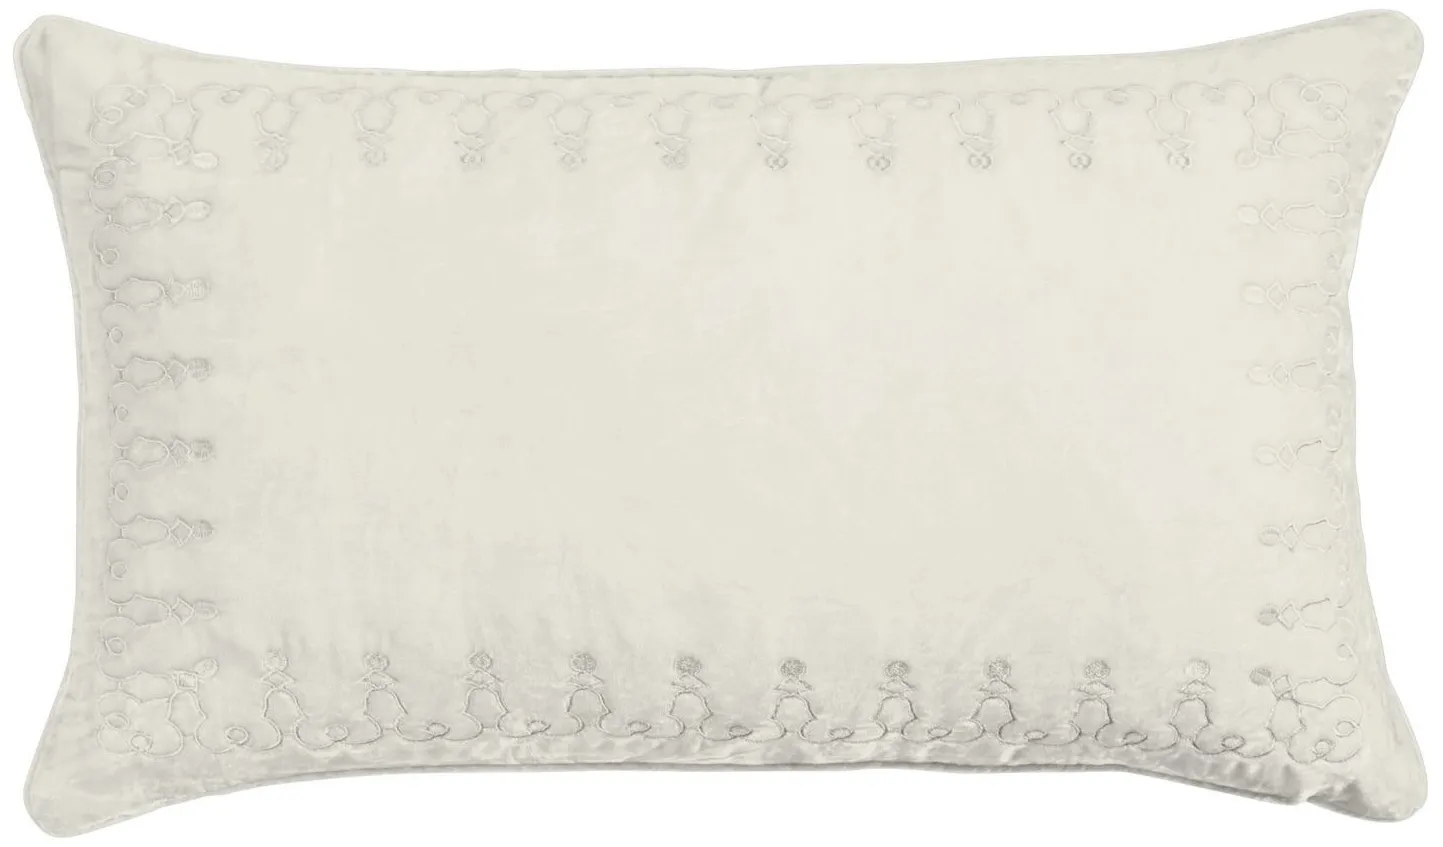 Zebediah Lumbar Pillow in Stone by HiEnd Accents